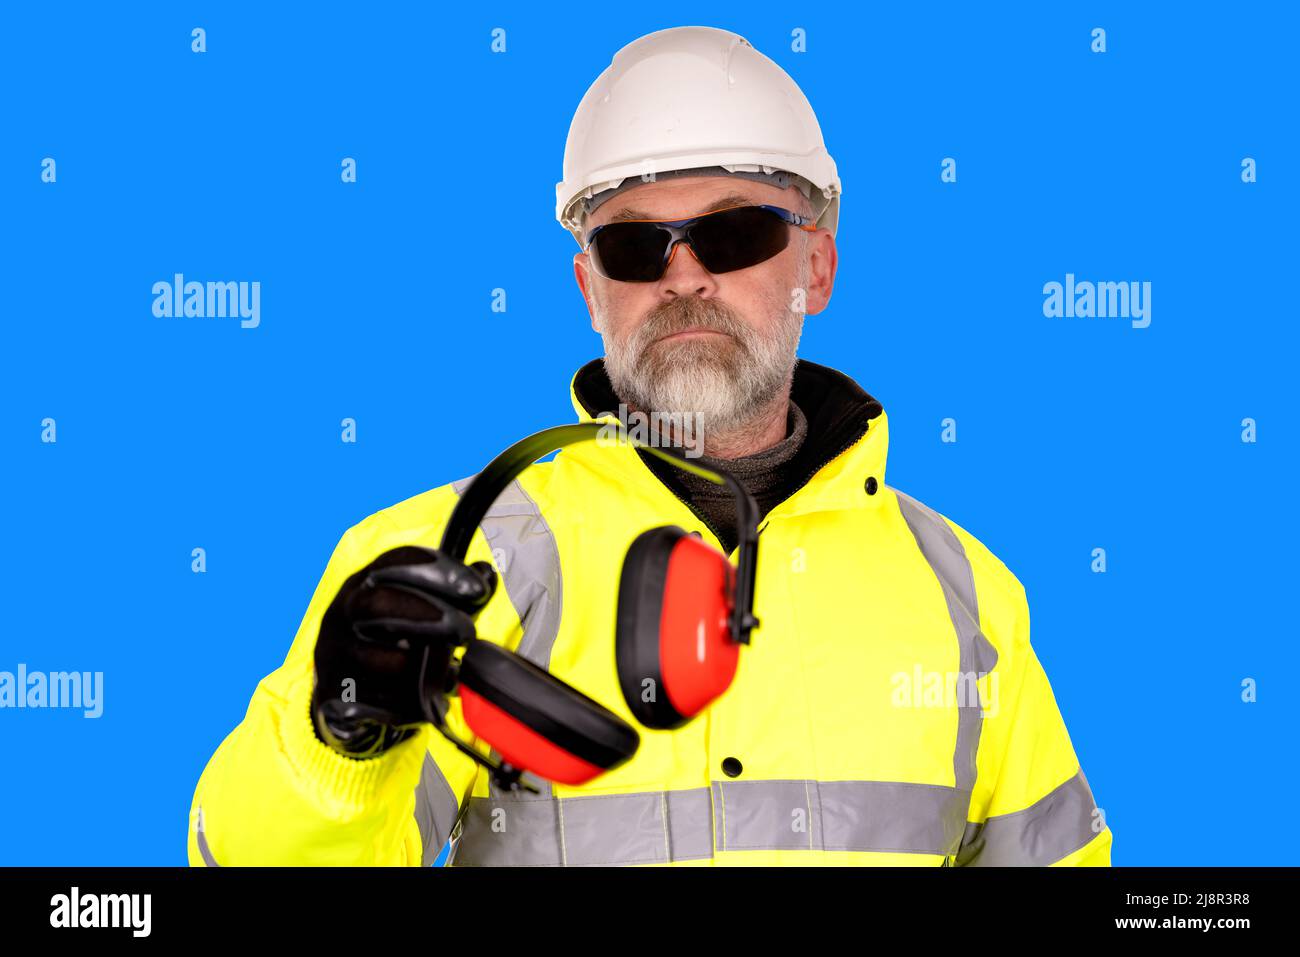 construction worker in hat yellow hi-viz coat and dark safety glasses on blue background gives foam-filled padded ear defenders to viewer Wear hearing Stock Photo